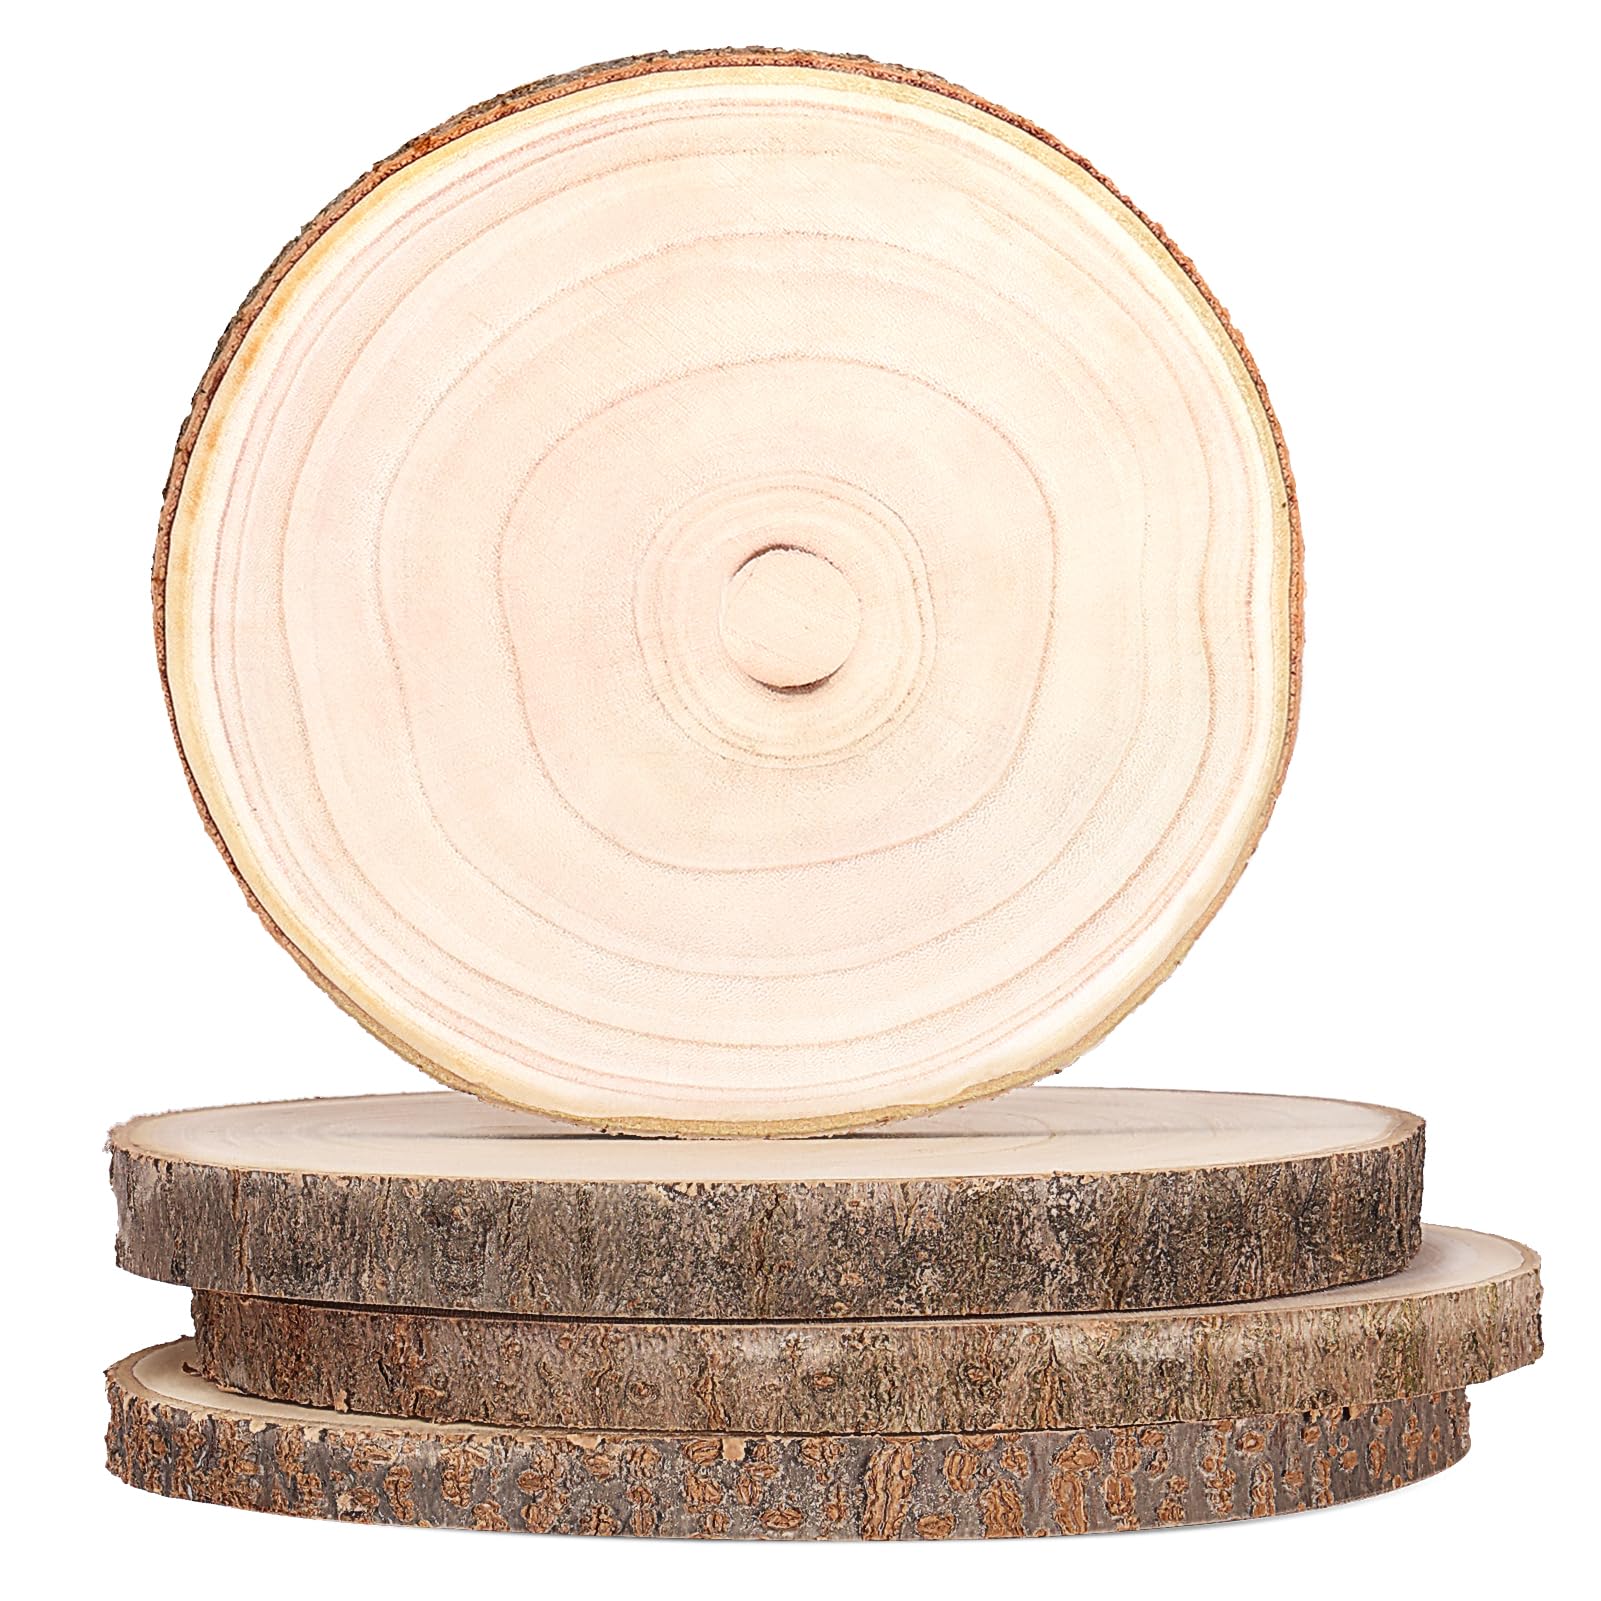 10pcs Natural Wood Pieces Slice Round Unfinished Wooden Discs For Crafts  Centerpieces Diy Christmas Ornaments 5.9inch